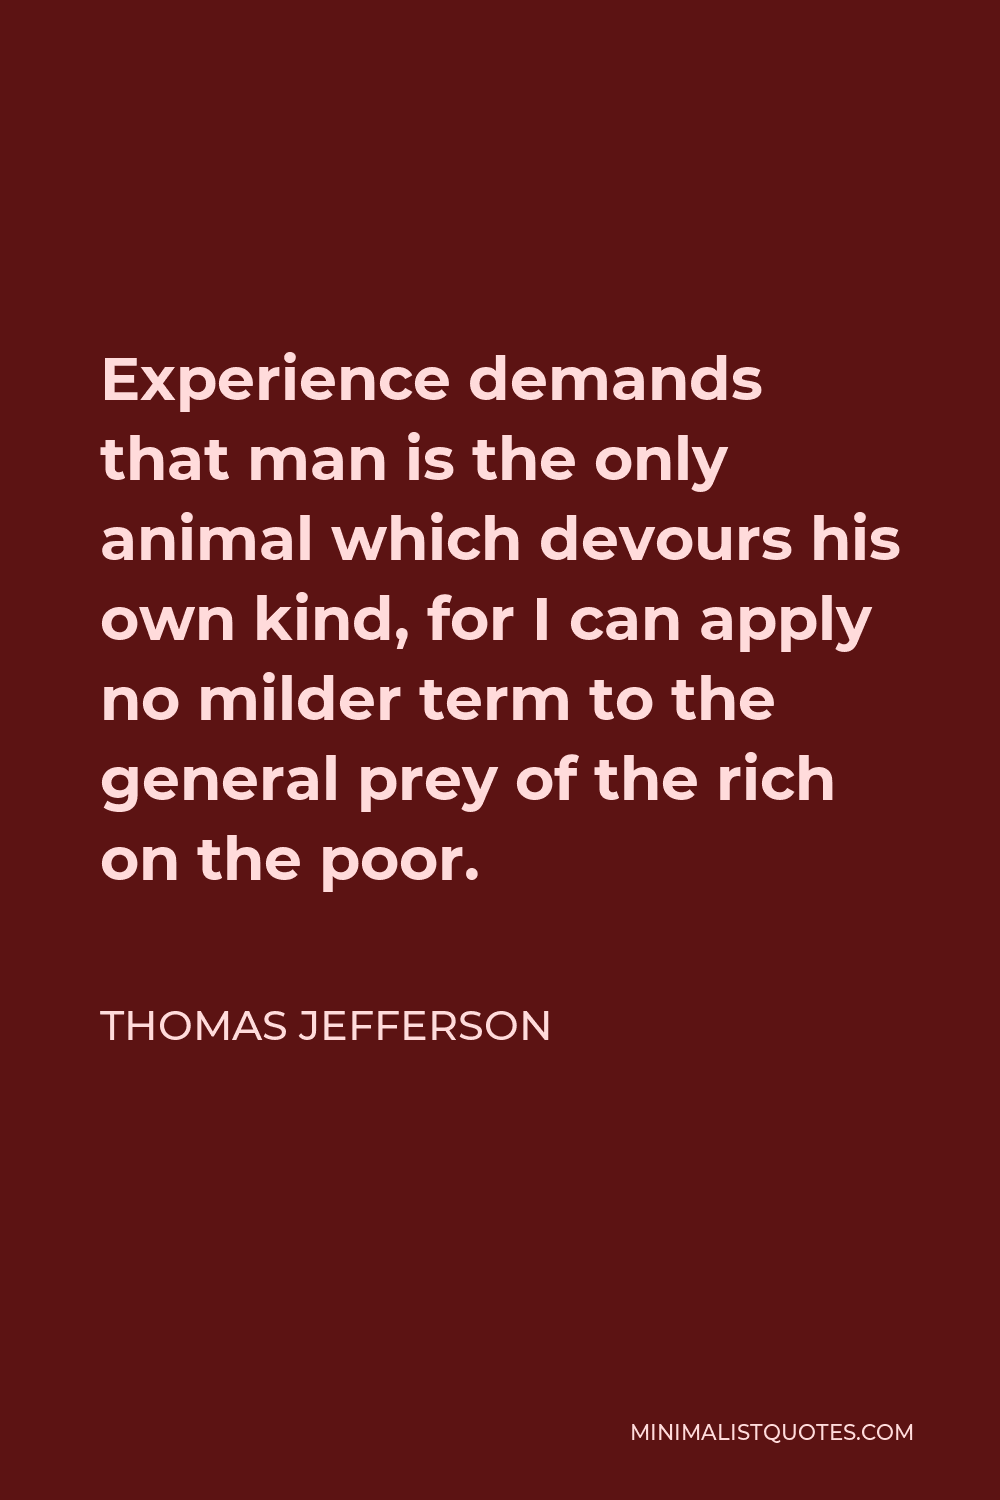 Thomas Jefferson Quote - Experience demands that man is the only animal which devours his own kind, for I can apply no milder term to the general prey of the rich on the poor.